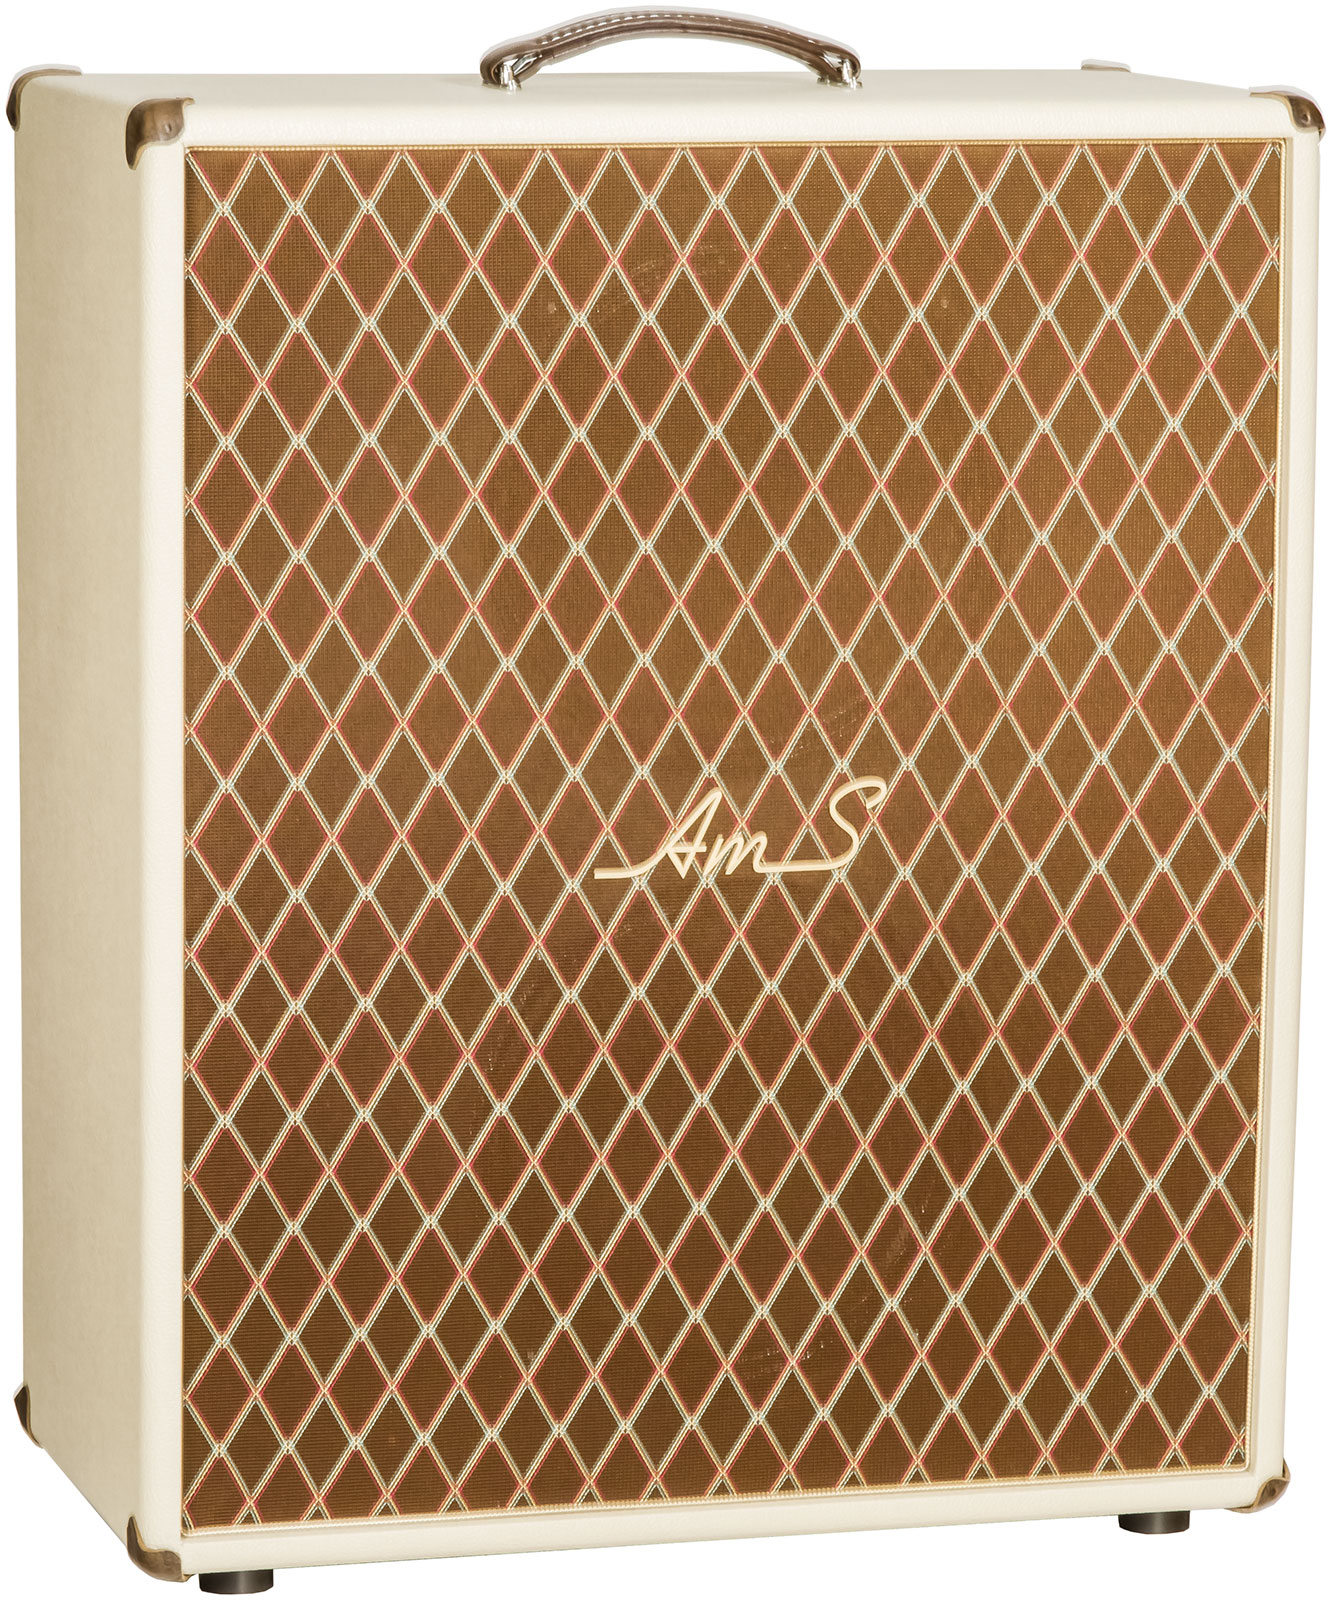 Ams Amplifiers The One 50 Analog Reverb Head 50w 6l6 + Cab 2x12 V30-ob White - Electric guitar amp stack - Variation 3